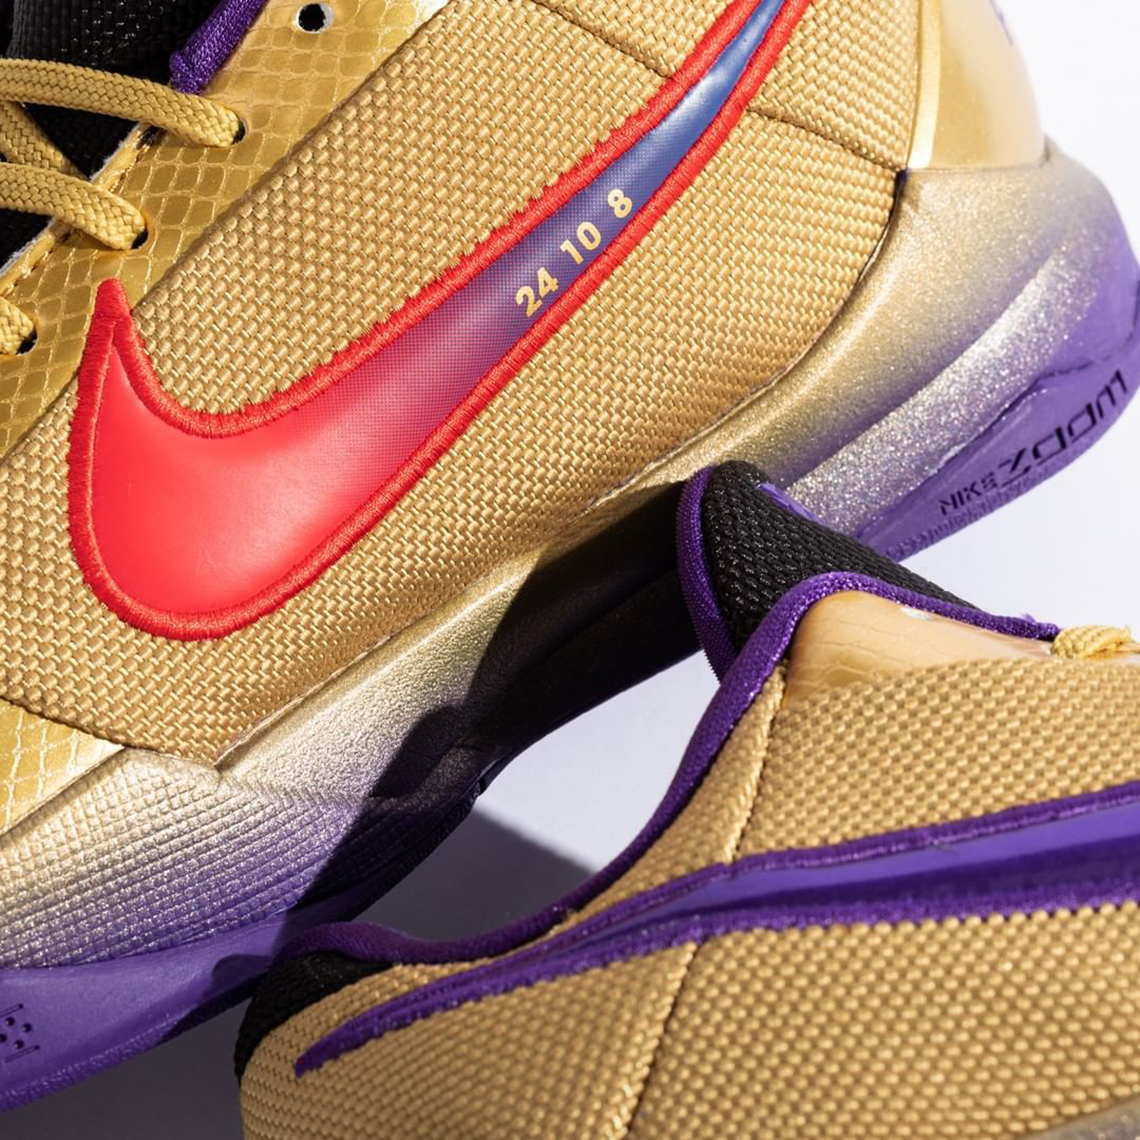 Get Ready for the UNDEFEATED x Nike Kobe 5 Protro Hall of Fame